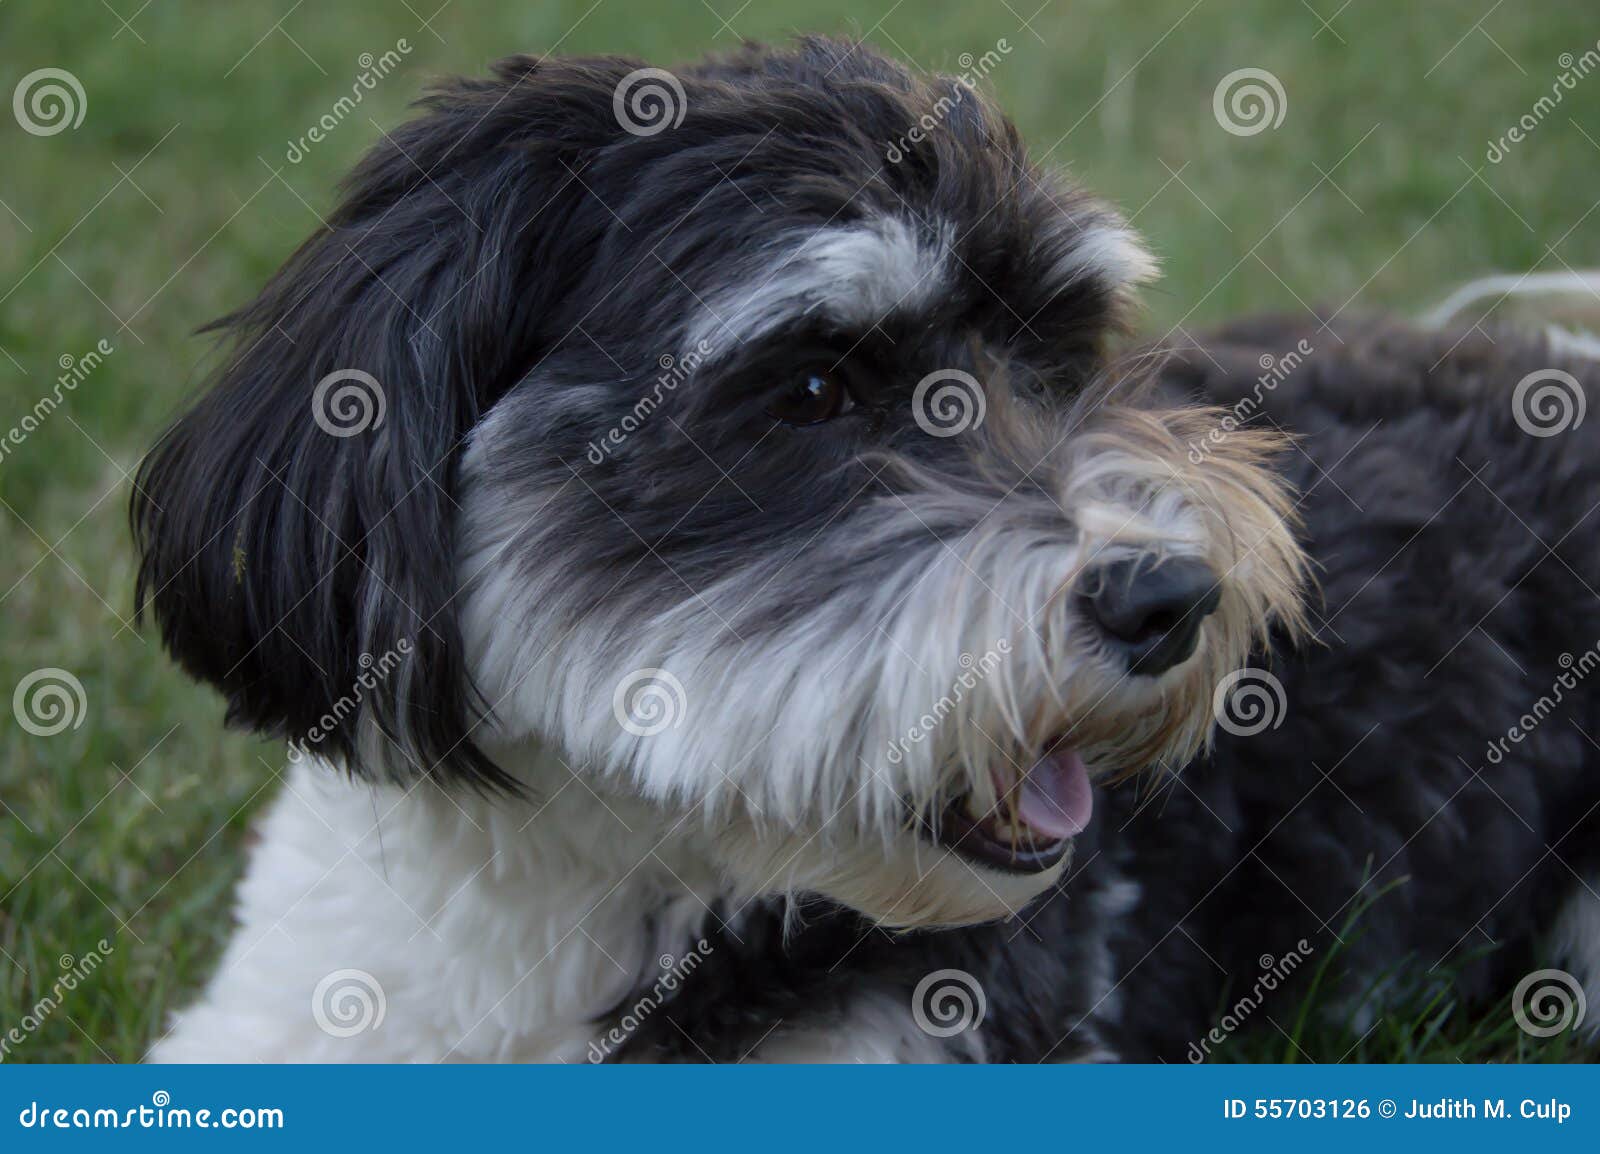 3 147 White Havanese Dog Photos Free Royalty Free Stock Photos From Dreamstime